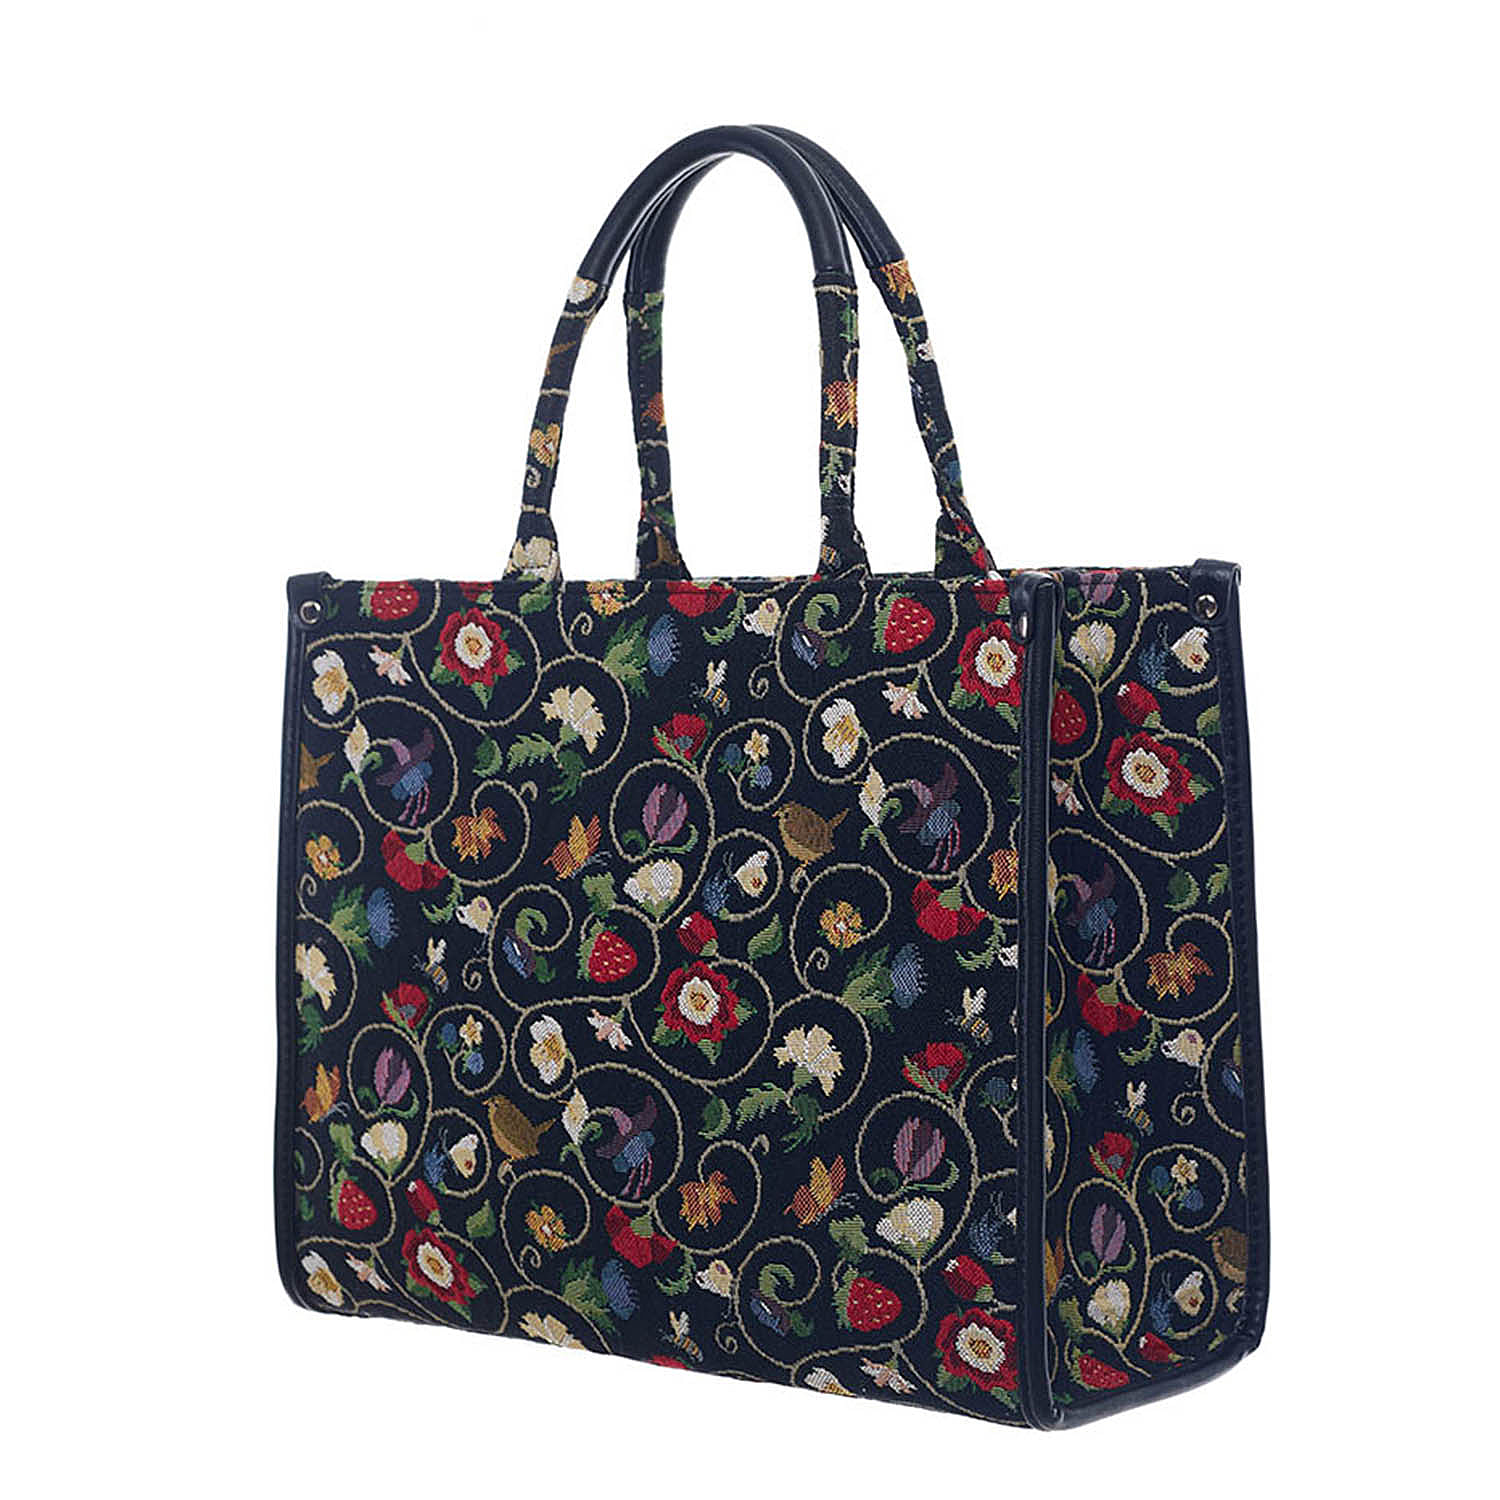 Signare Tapestry Jacobean Dream Liscensed with Shakespeare Birthplace Trust Leatherette City Bag - Floral